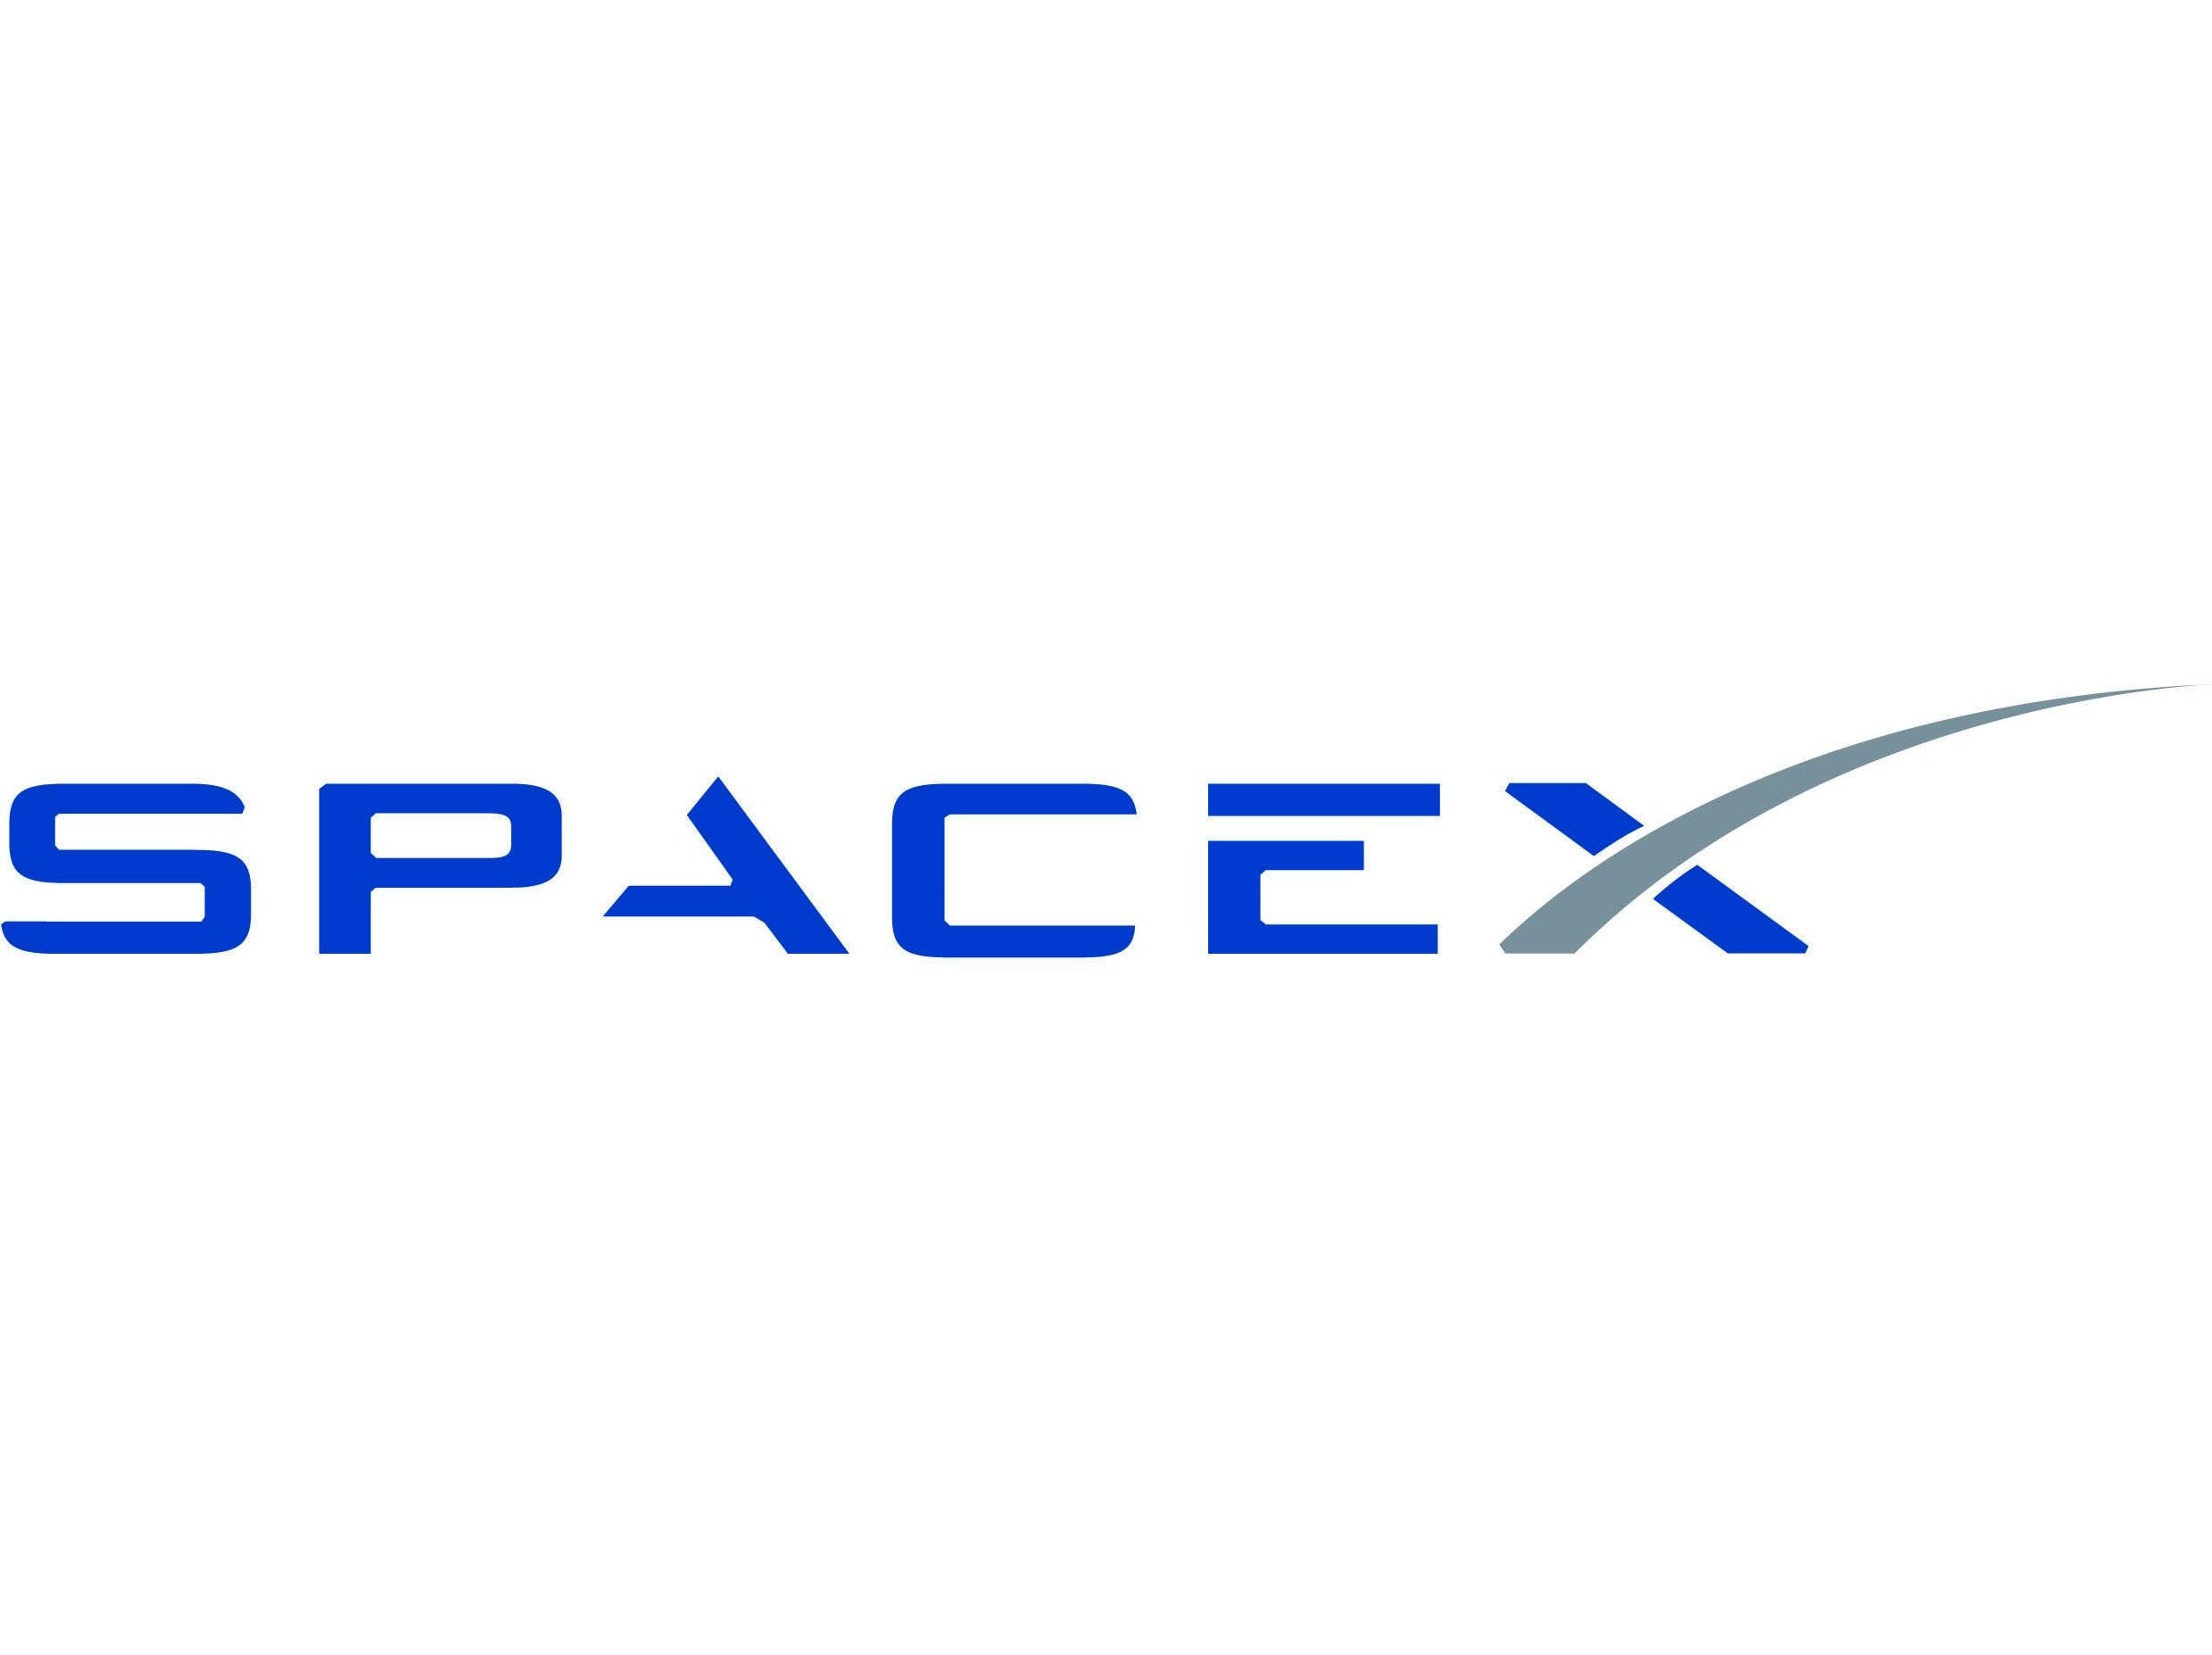 SpaceX Falcon 9 Logo - Top 5 Companies To Watch | SpaceX - SpaceNews.com